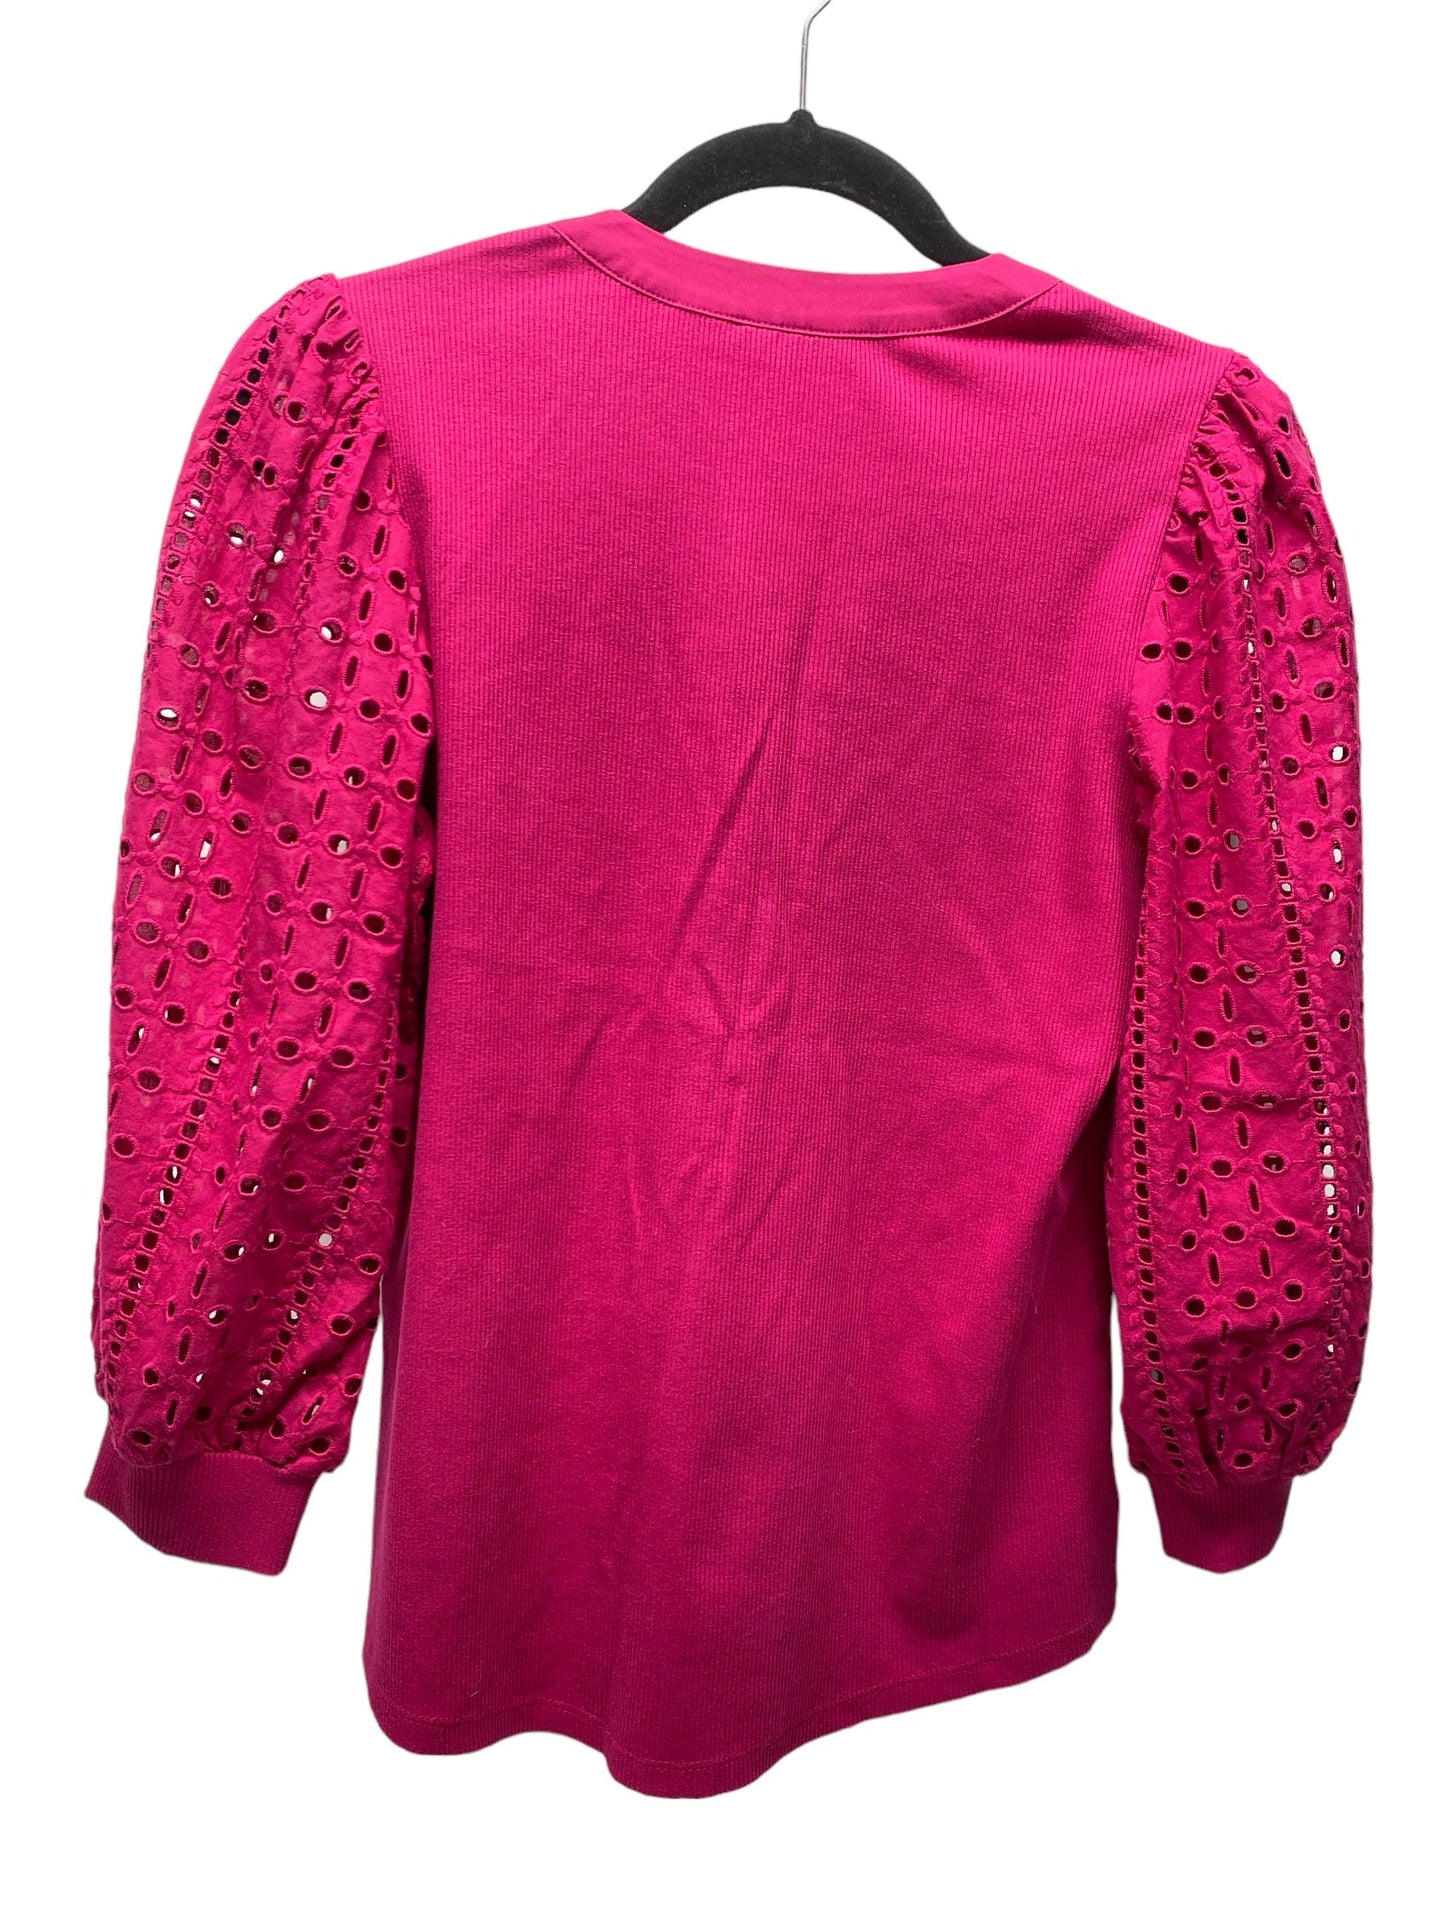 Pink Top 3/4 Sleeve Chicos, Size S